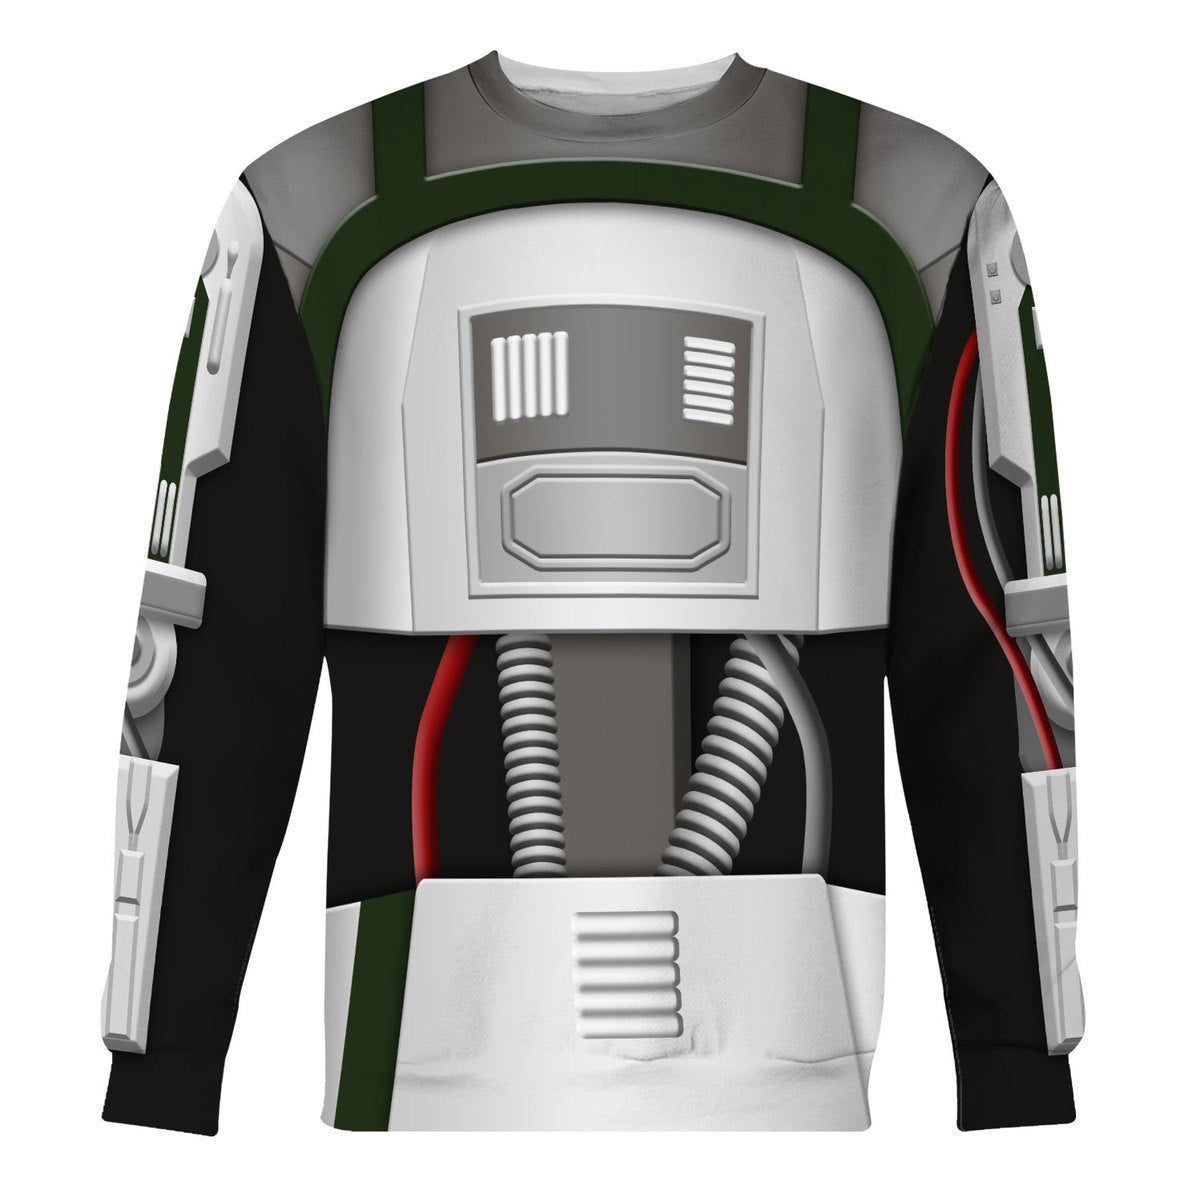 Star Wars L3-37's Costume - Sweater - Ugly Christmas Sweater